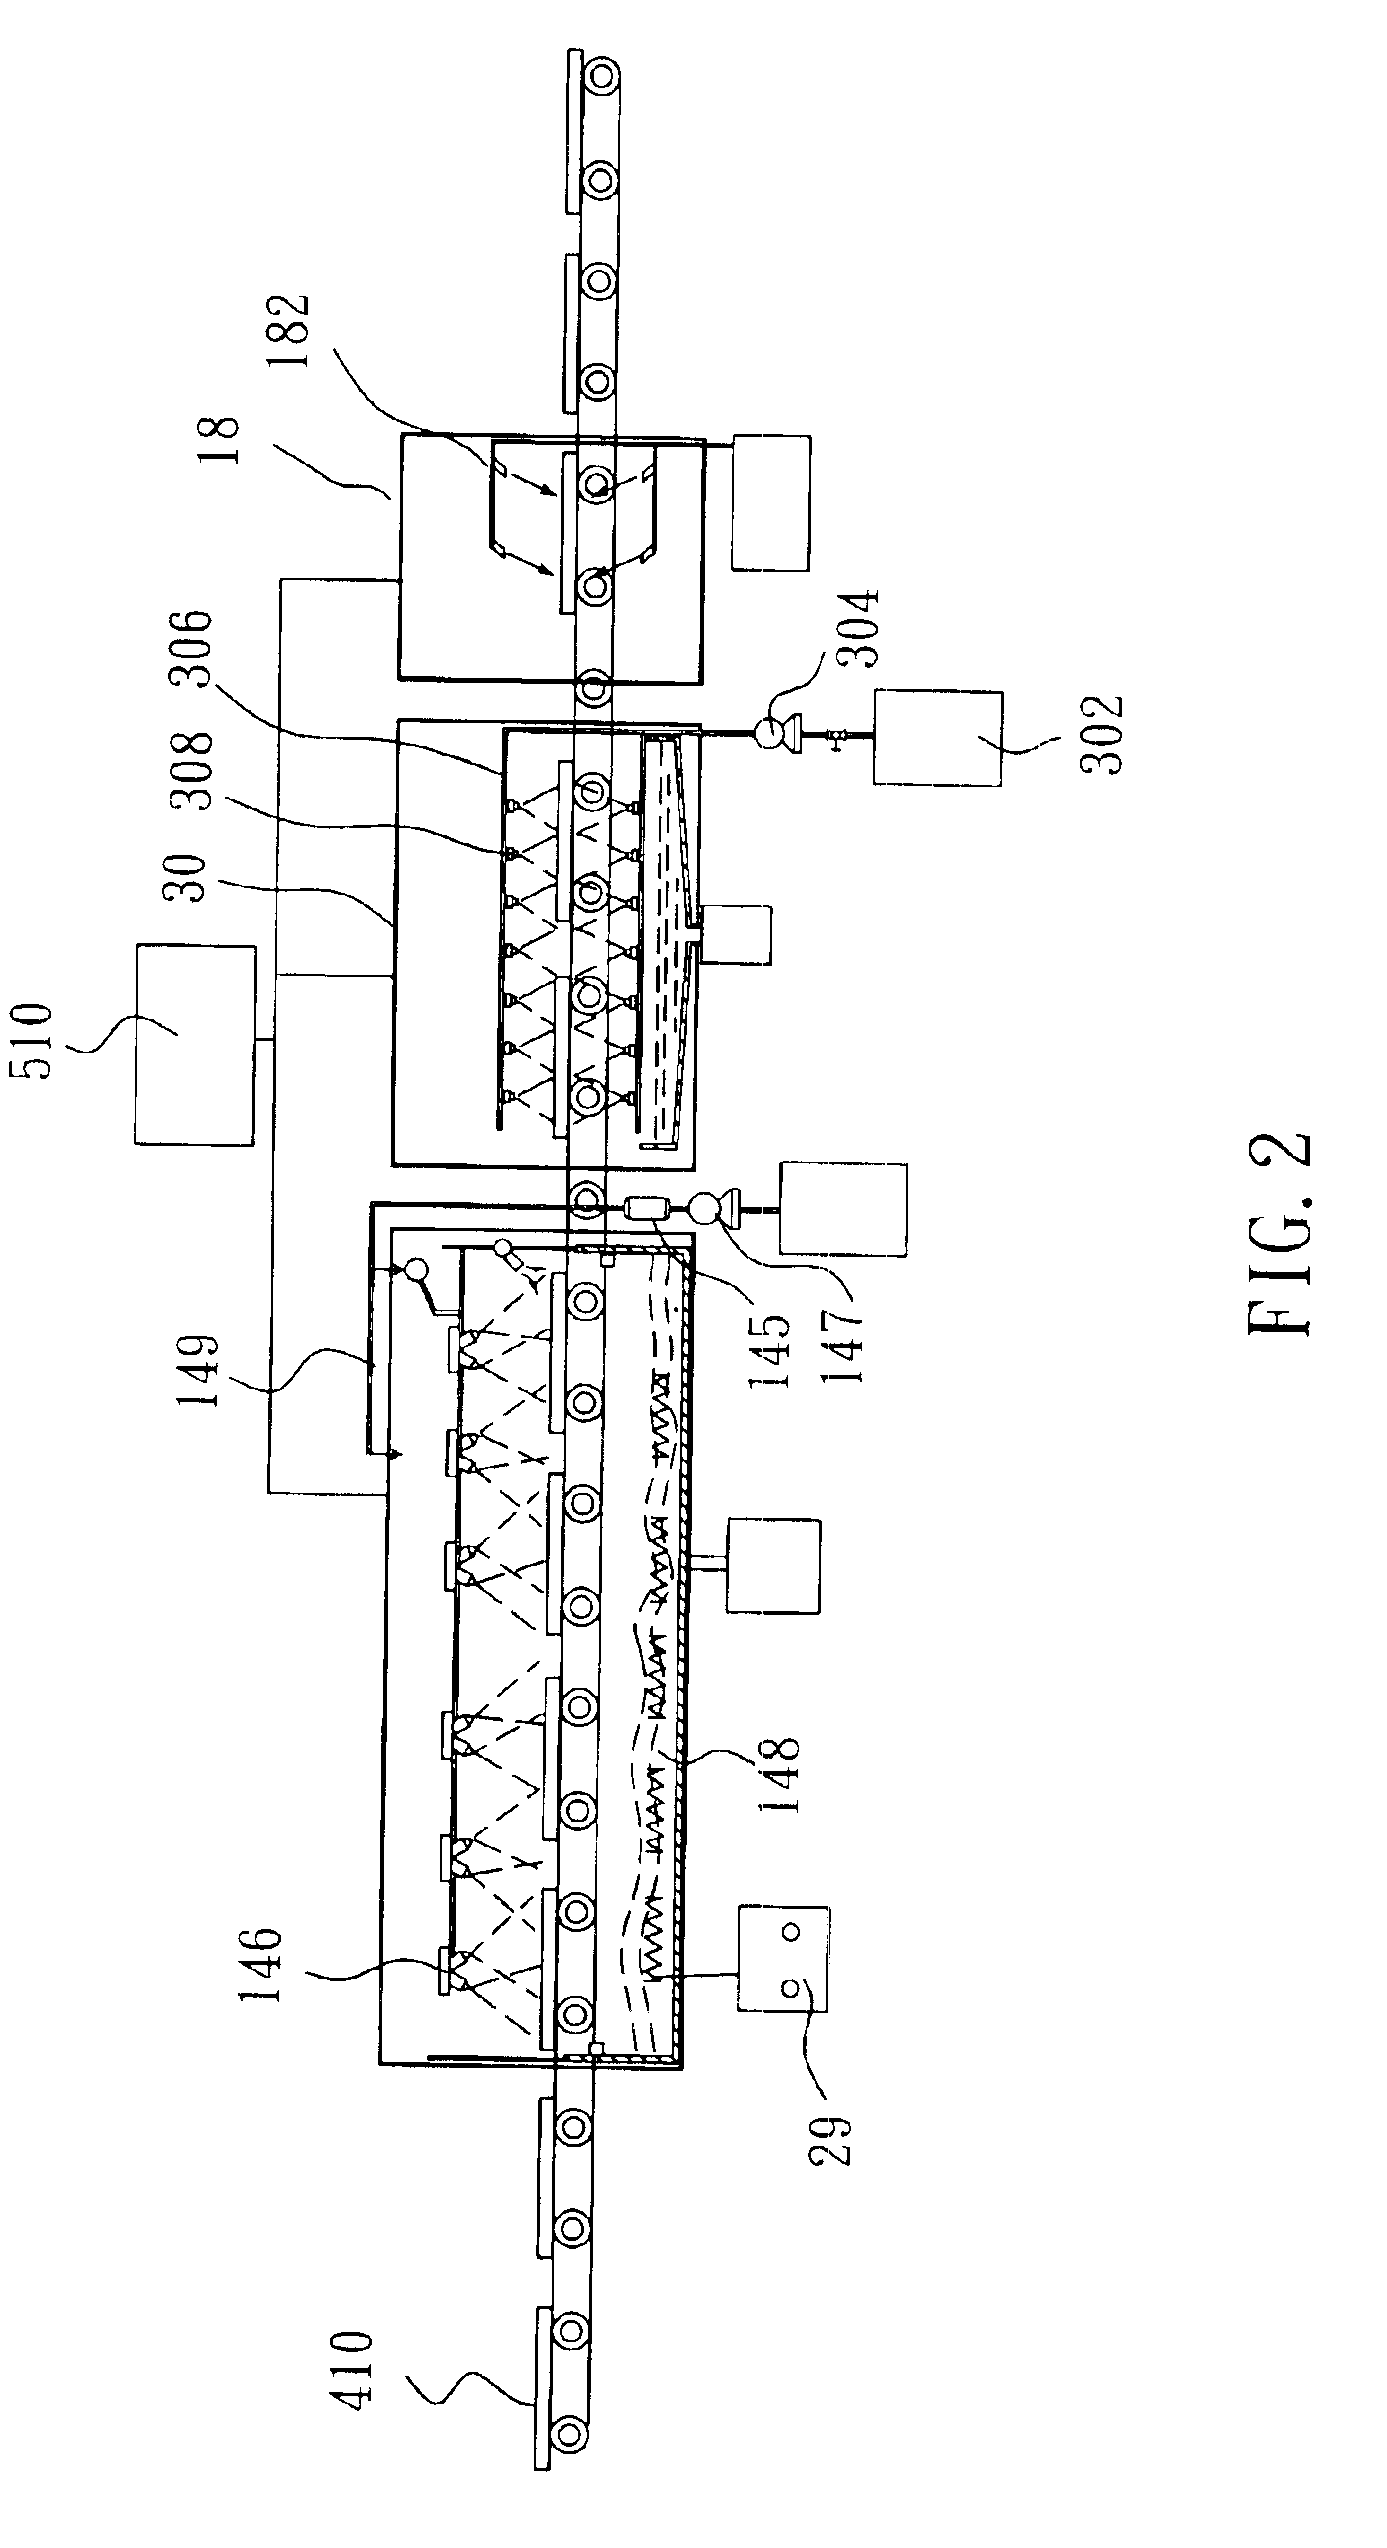 Developing apparatus and method for developing organic electroluminescent display panels